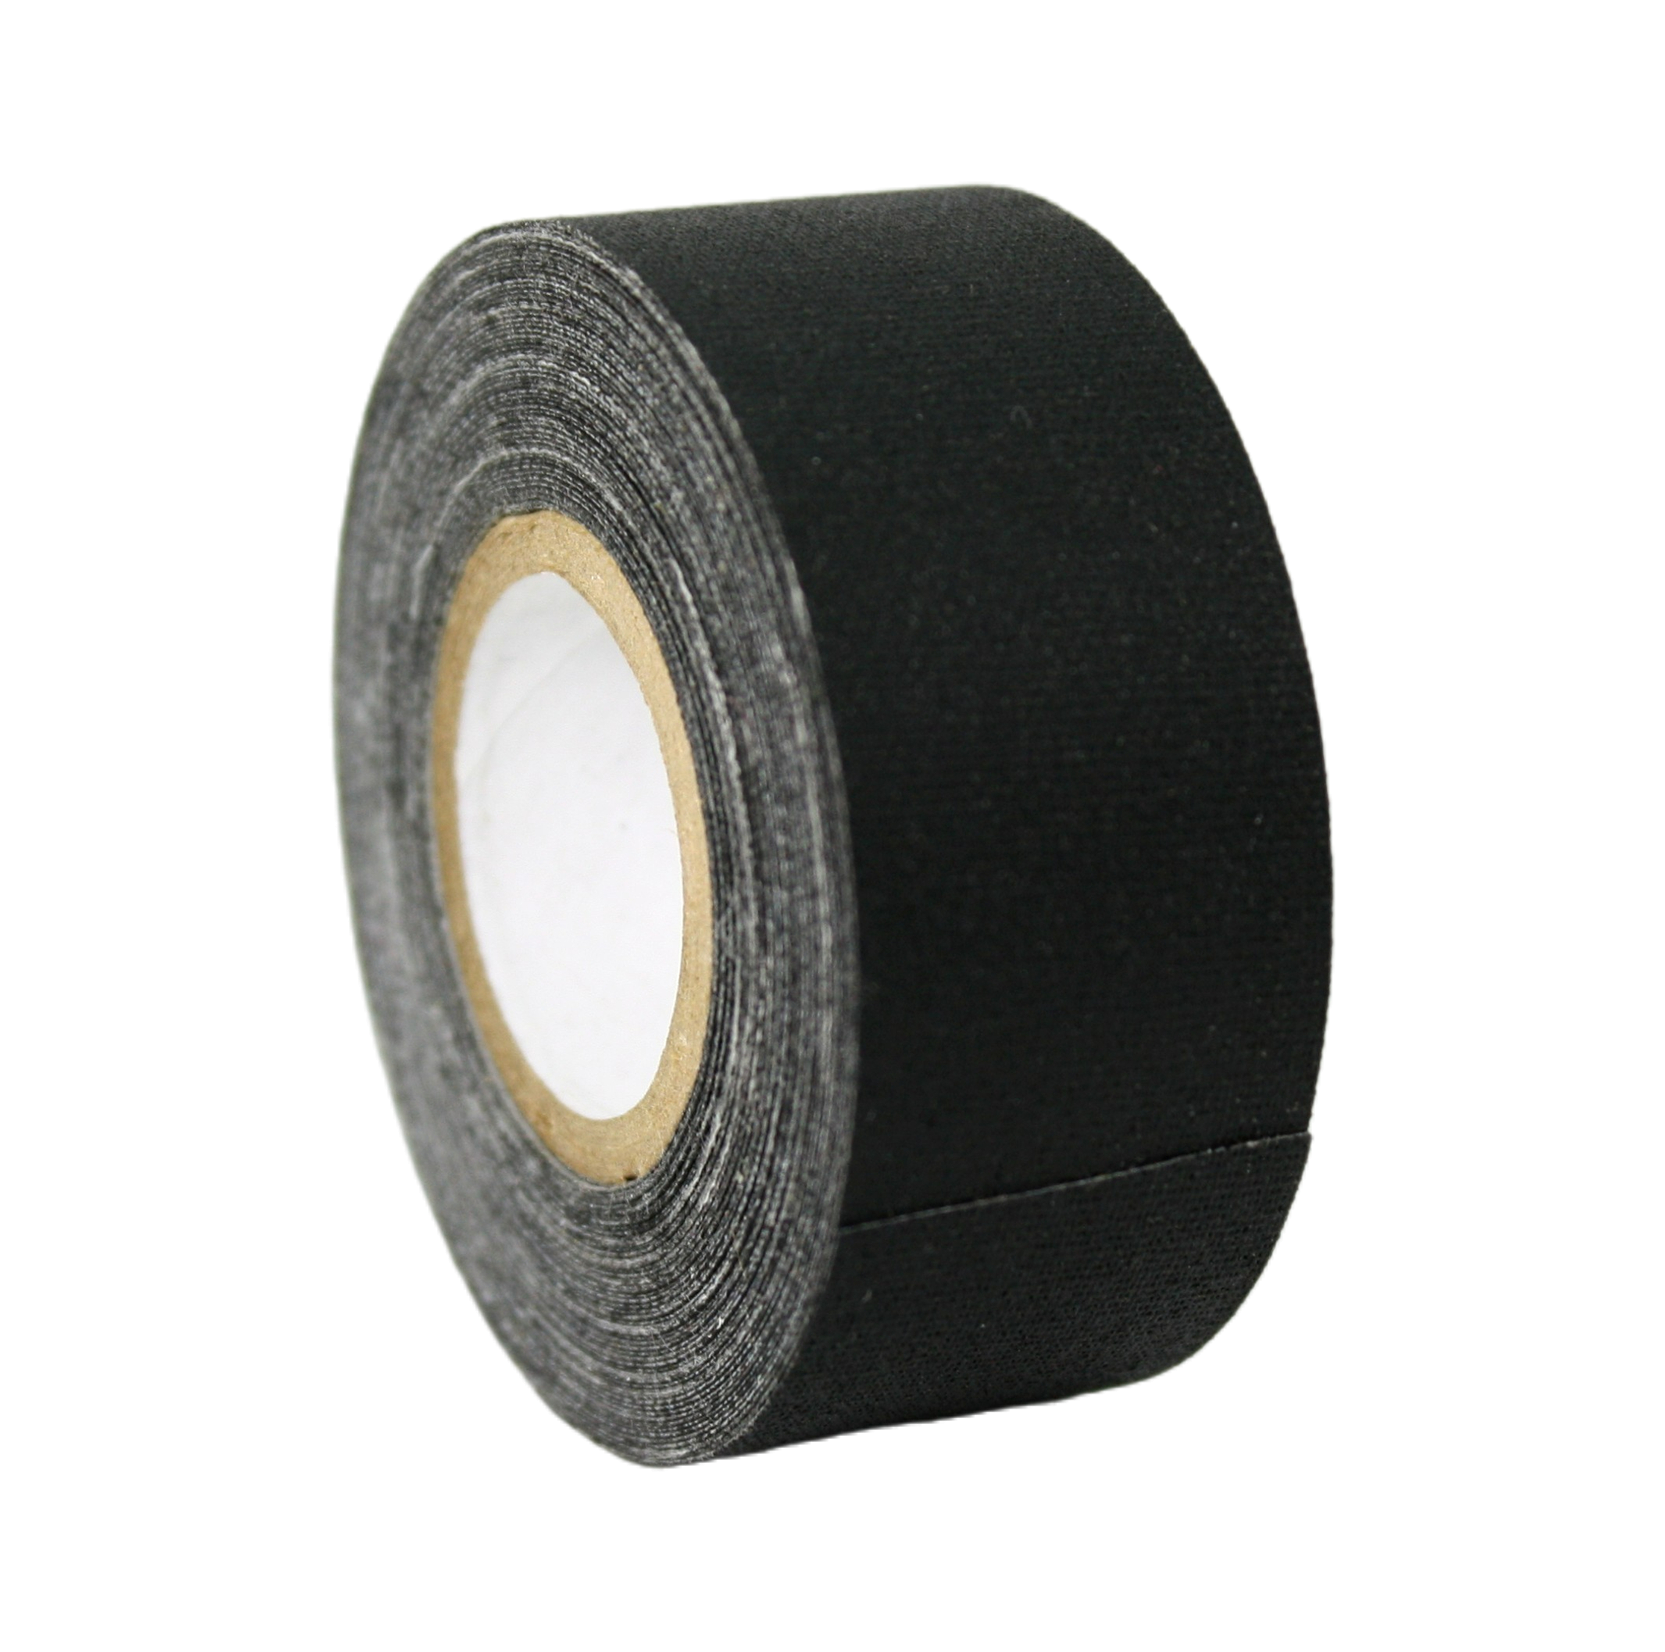 A close up of a single roll of black Micro Gaffer 1" tape.